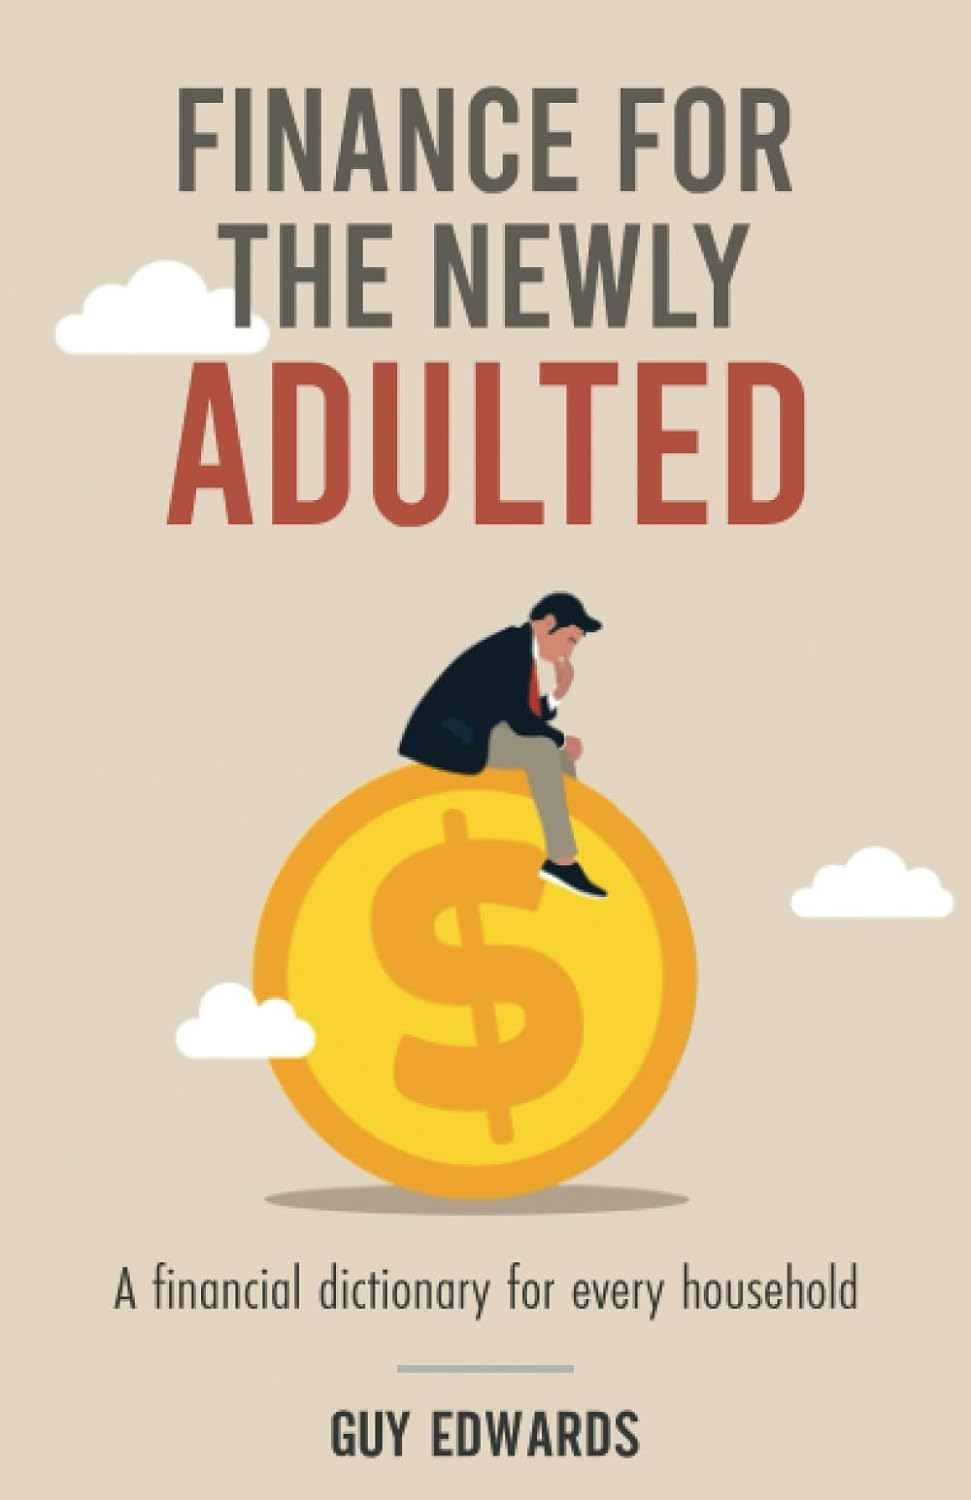 Finance for the Newly Adulted: What You Will Learn From This Book?